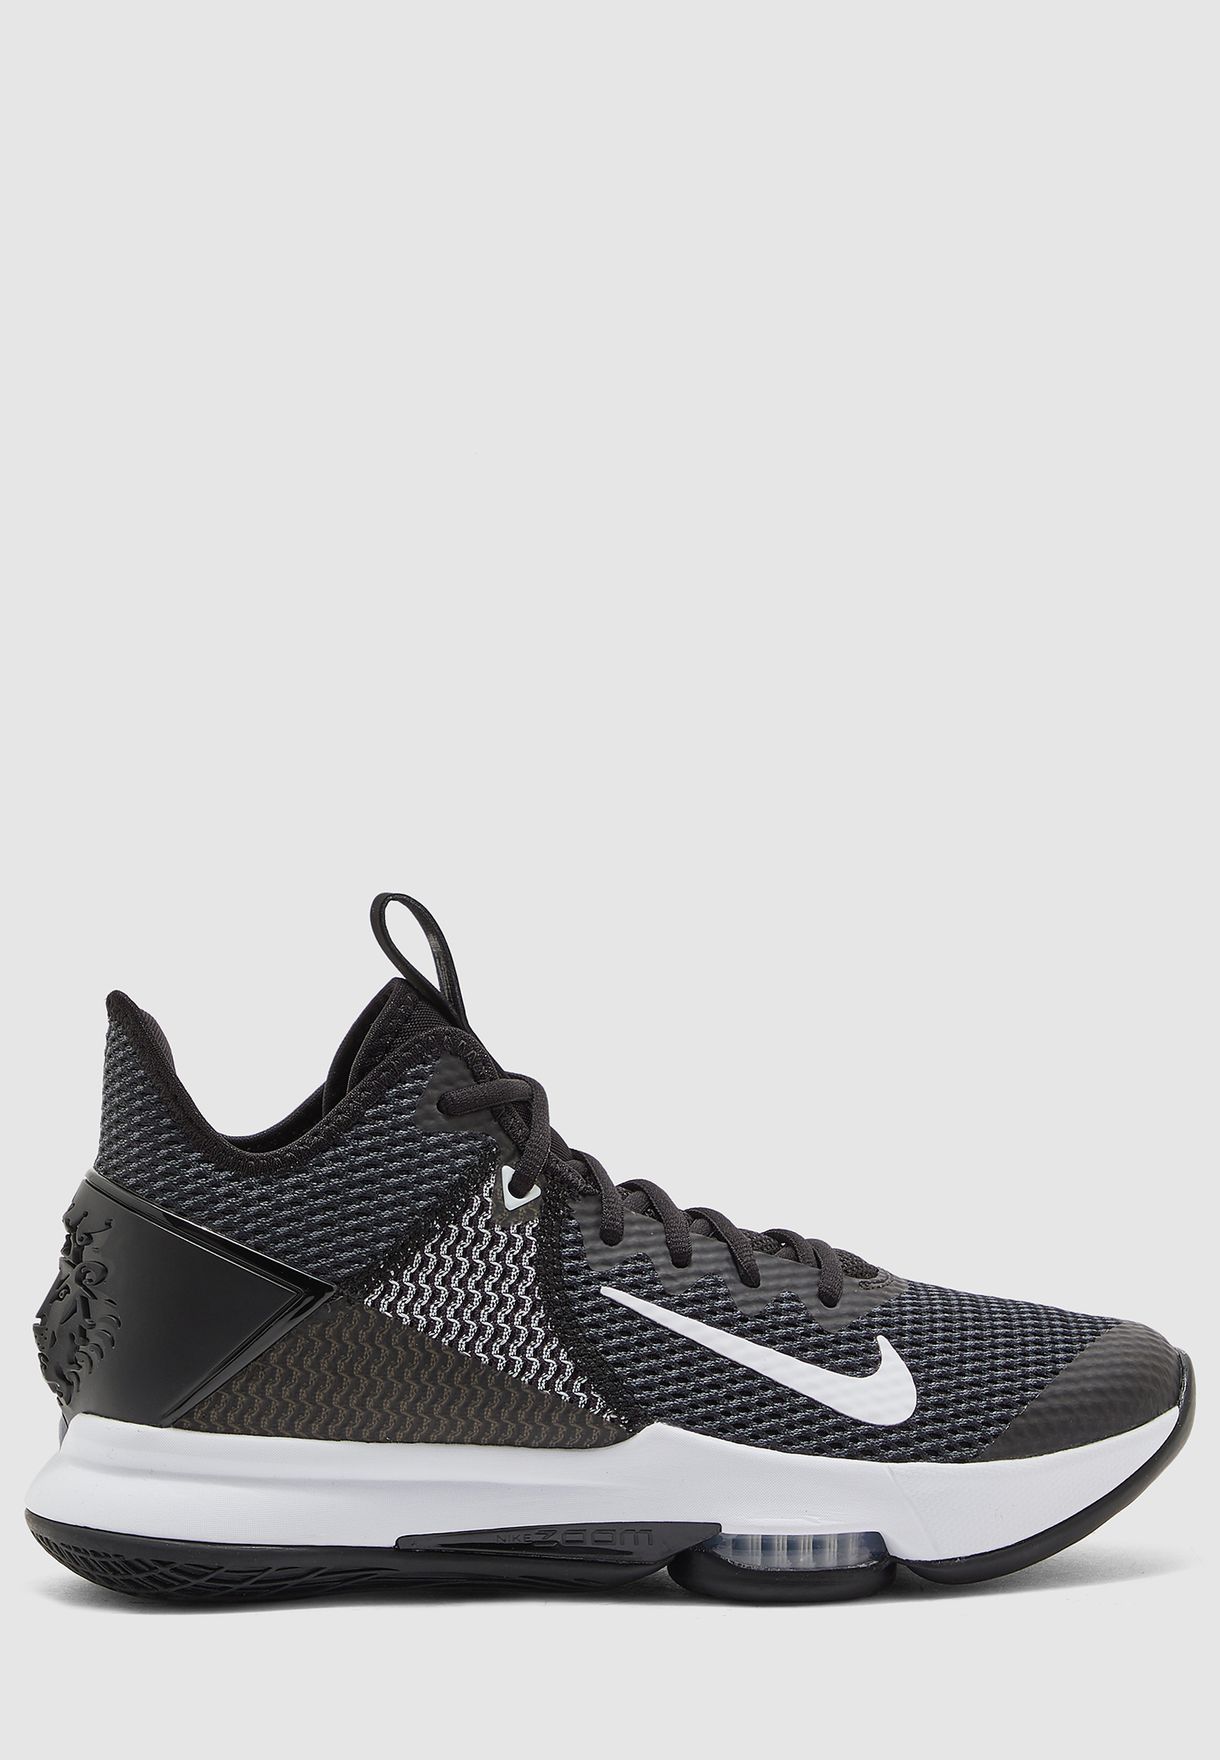 nike men's lebron witness 4 basketball shoes stores